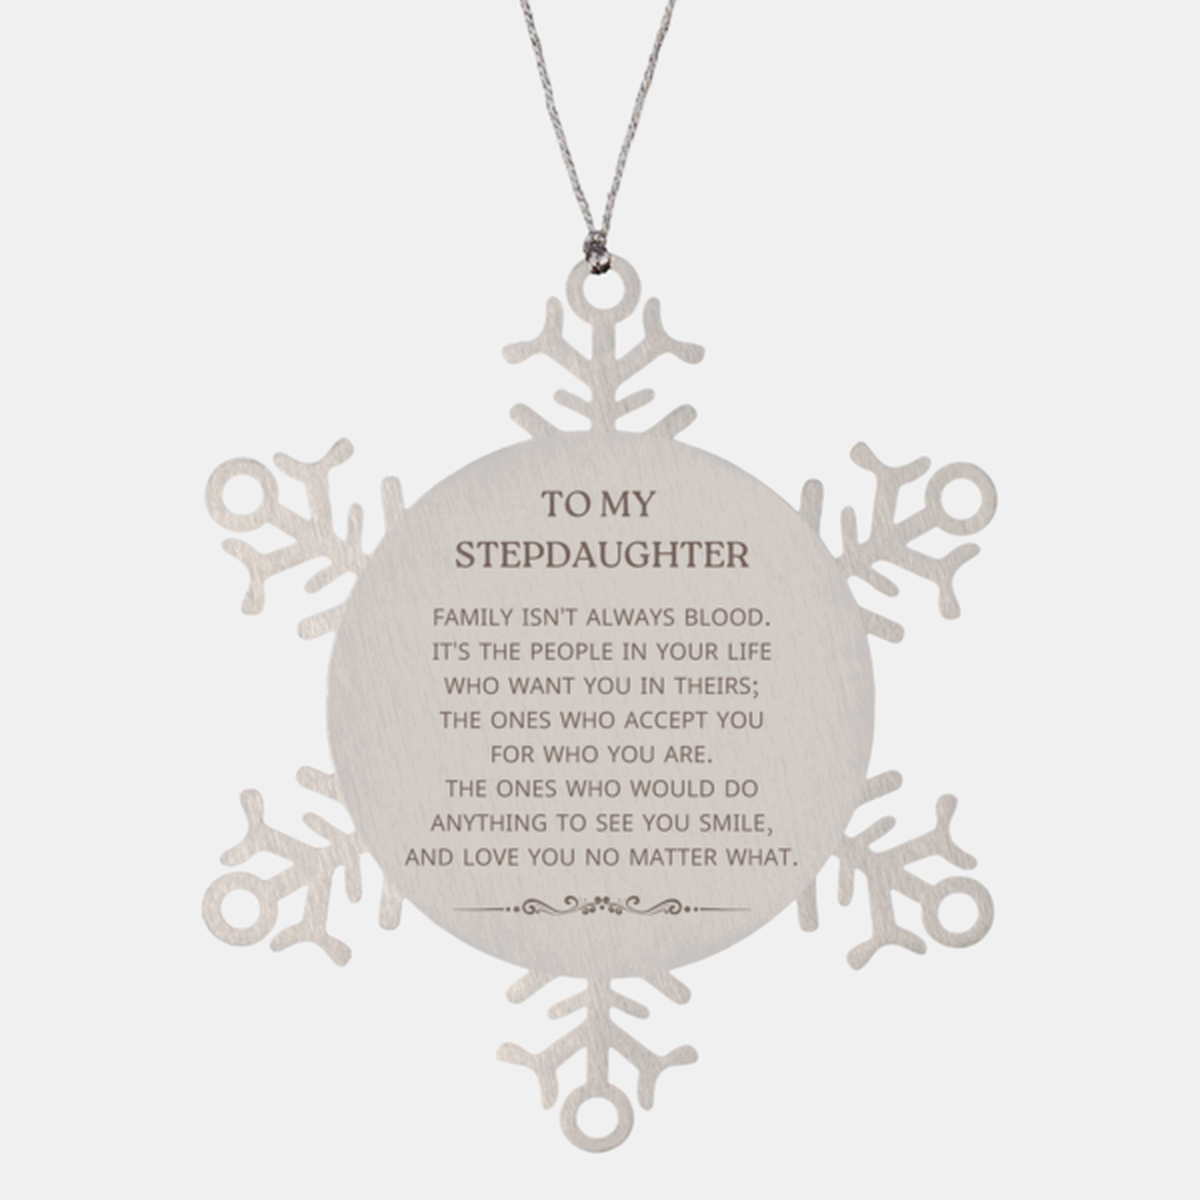 To My Stepdaughter Gifts, Family isn't always blood, Stepdaughter Snowflake Ornament, Birthday Christmas Unique Present For Stepdaughter